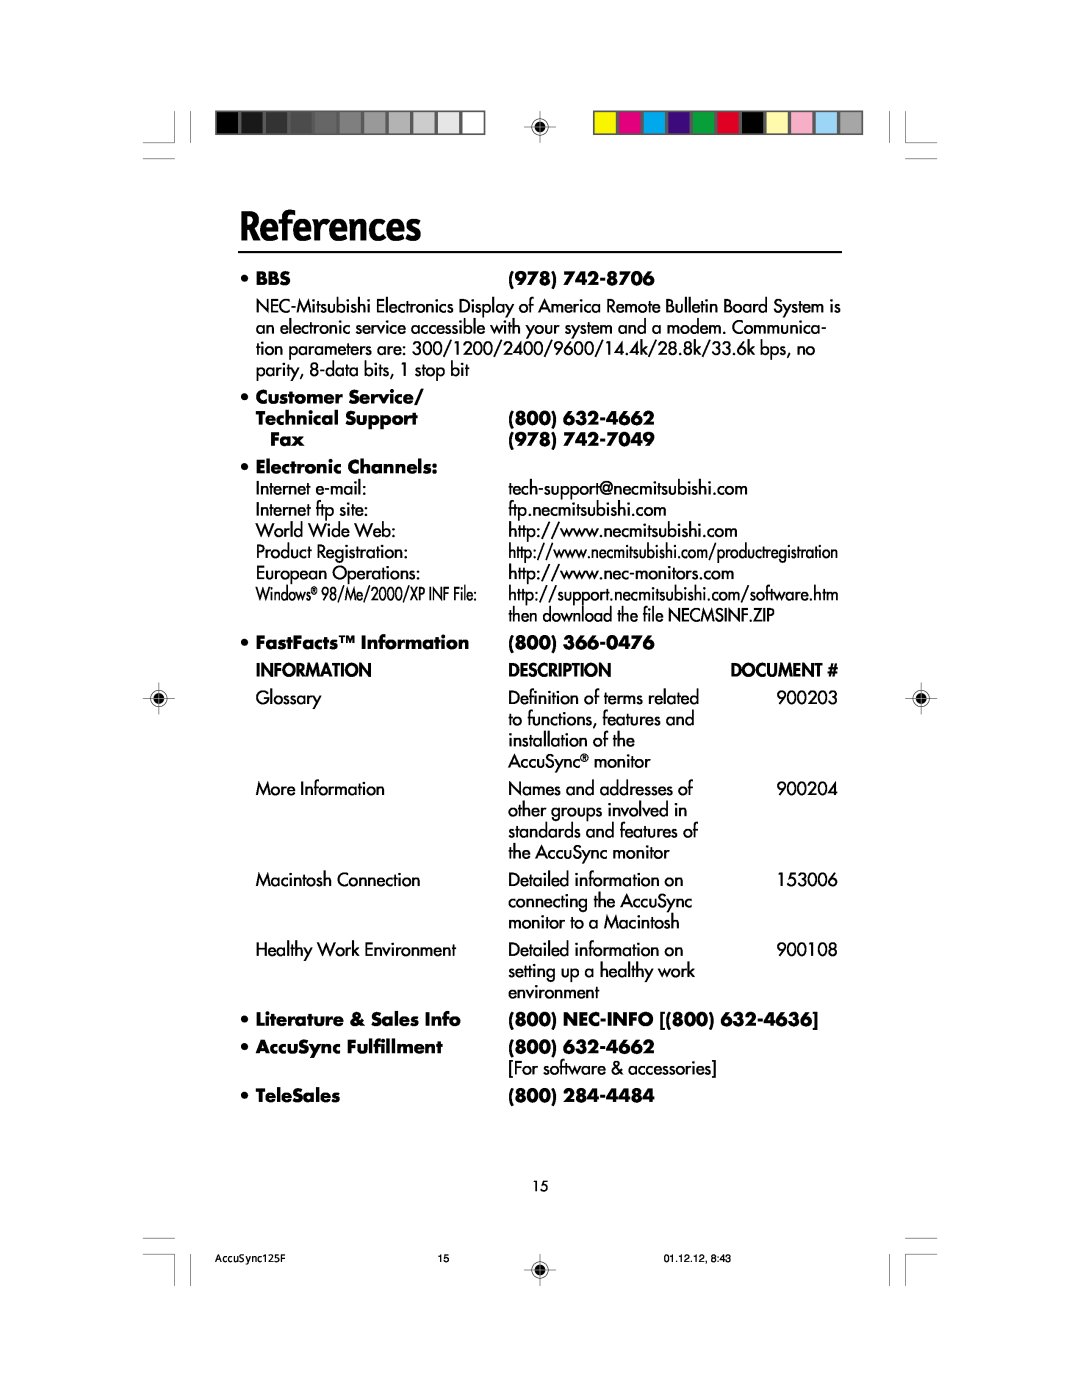 NEC 125F user manual References, Document # 